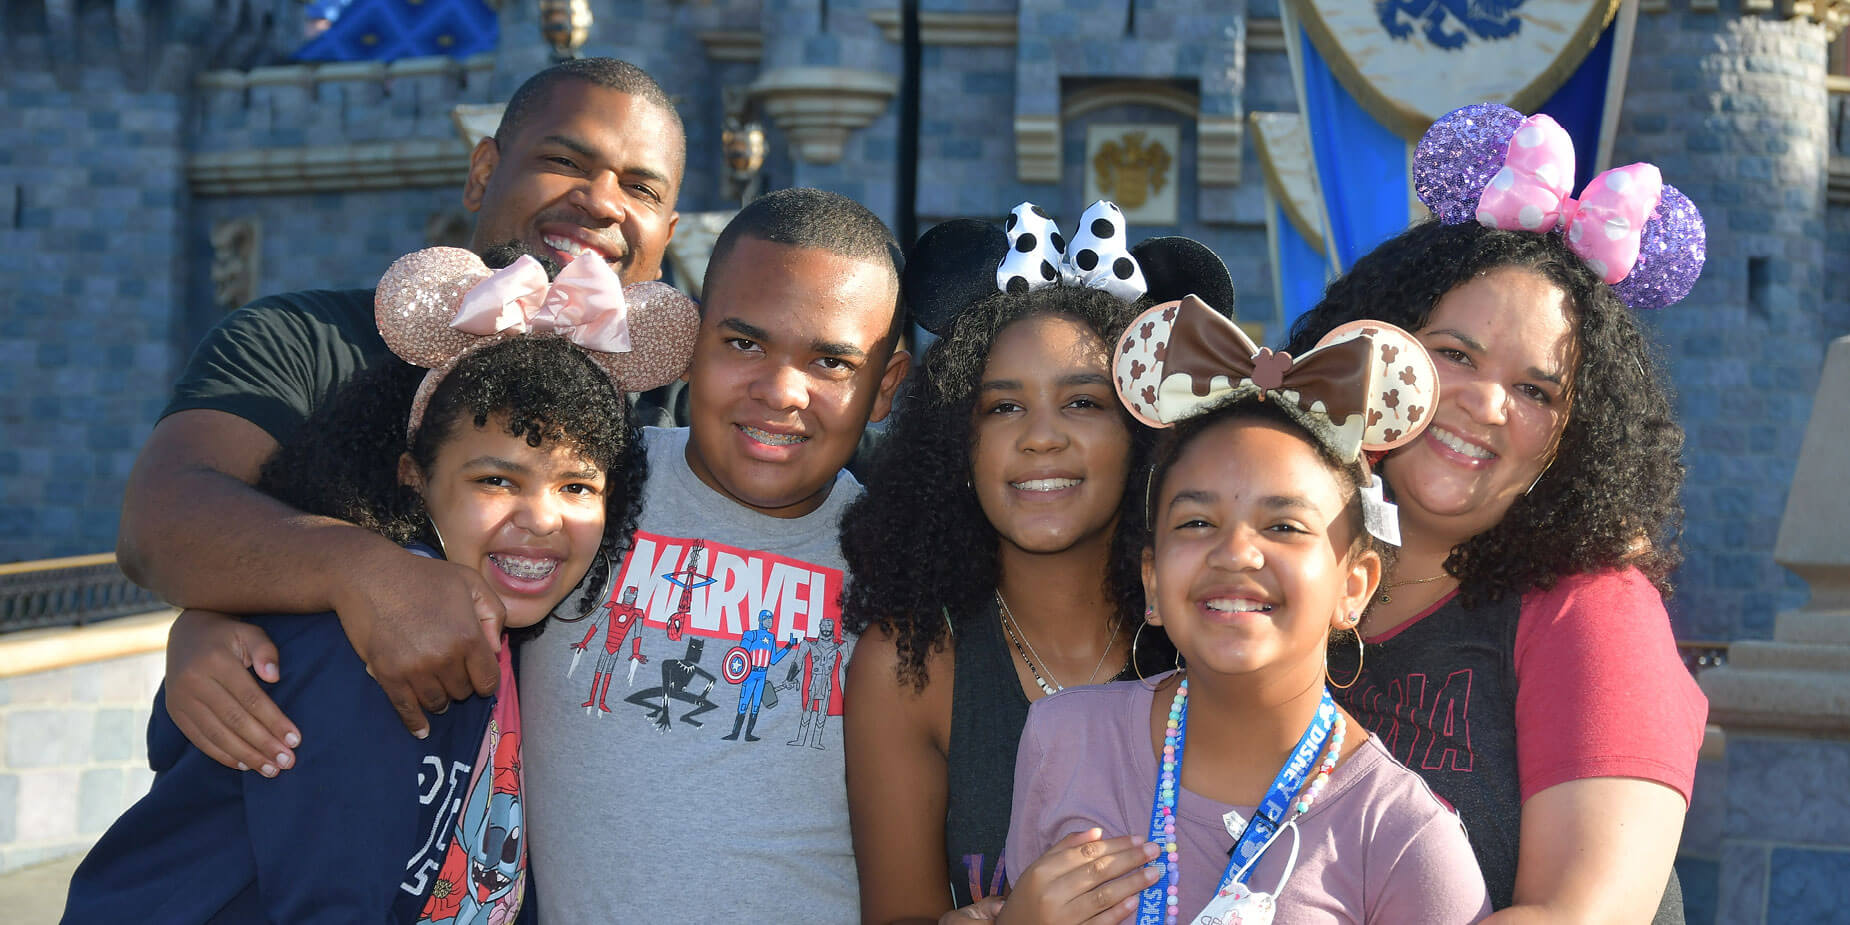 Dolan Williams with his four kids and wife in front of the Disneyland castle in Anaheim, California.